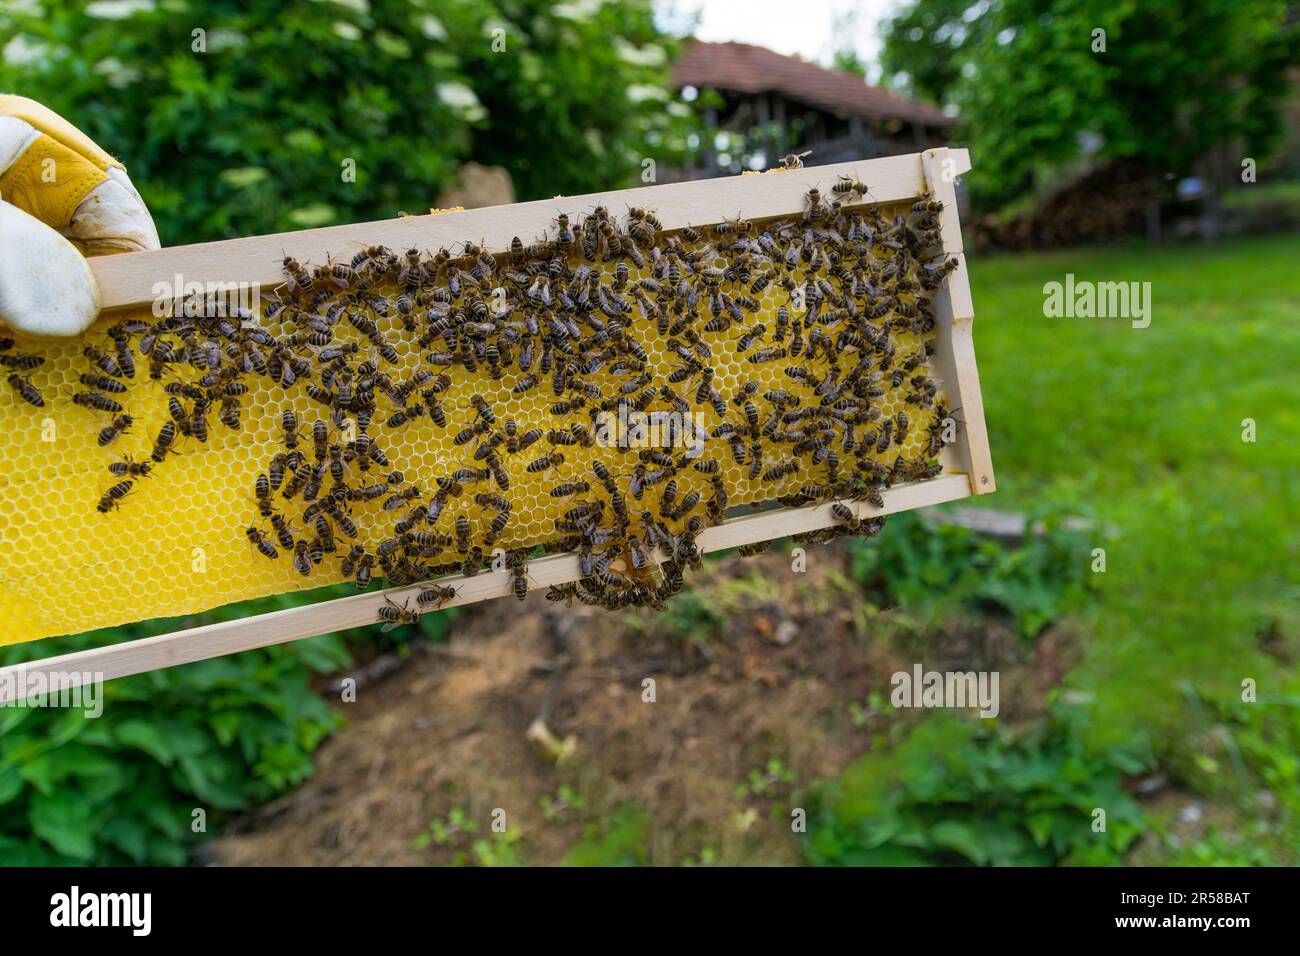 Newly built honeycomb on a frame being filled with honey by young bees. Close-up of the frame in the beekeeper's hand outdoors at the apiary Stock Photo